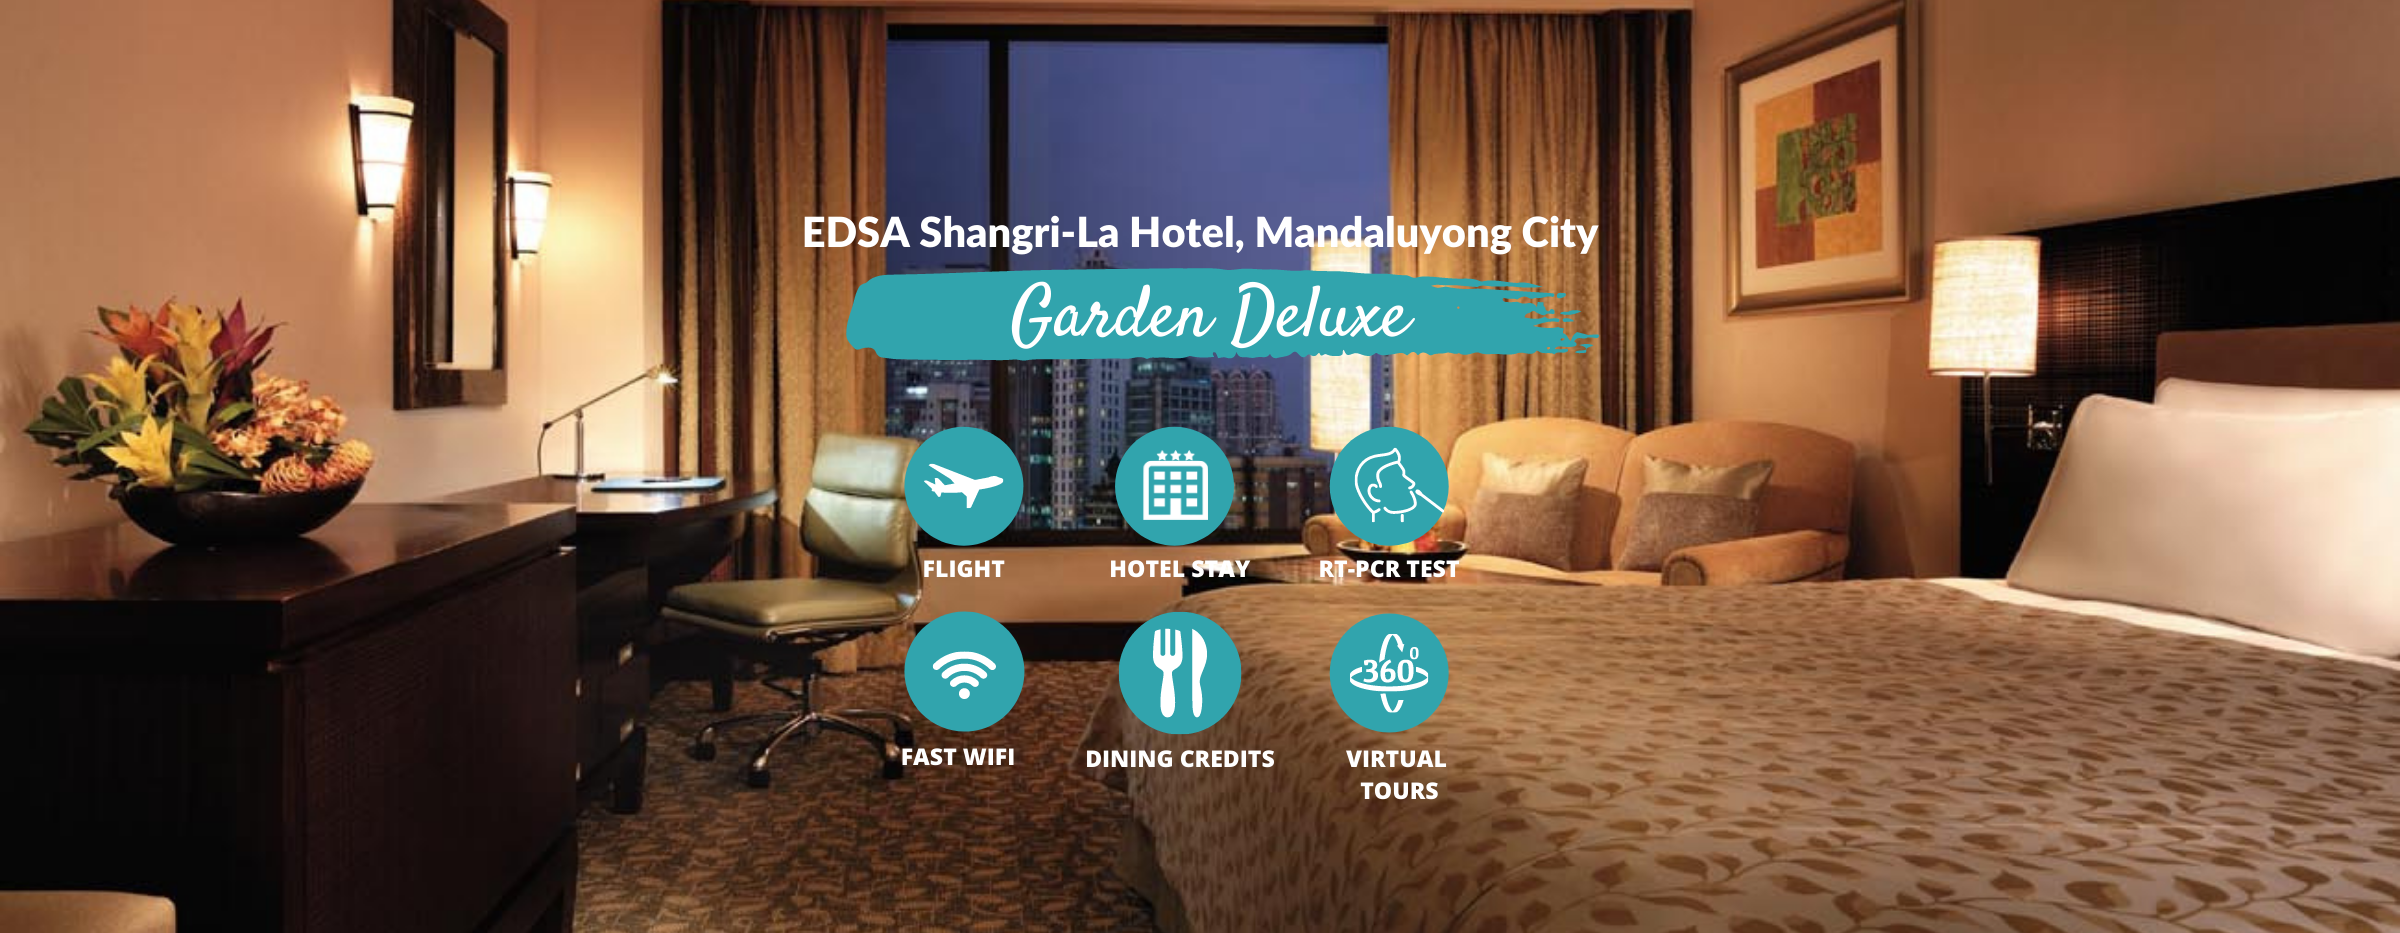 Manila Quarantine from Vancouver at EDSA Shangri-La with Philippine Airlines, Meals & Virtual Tours